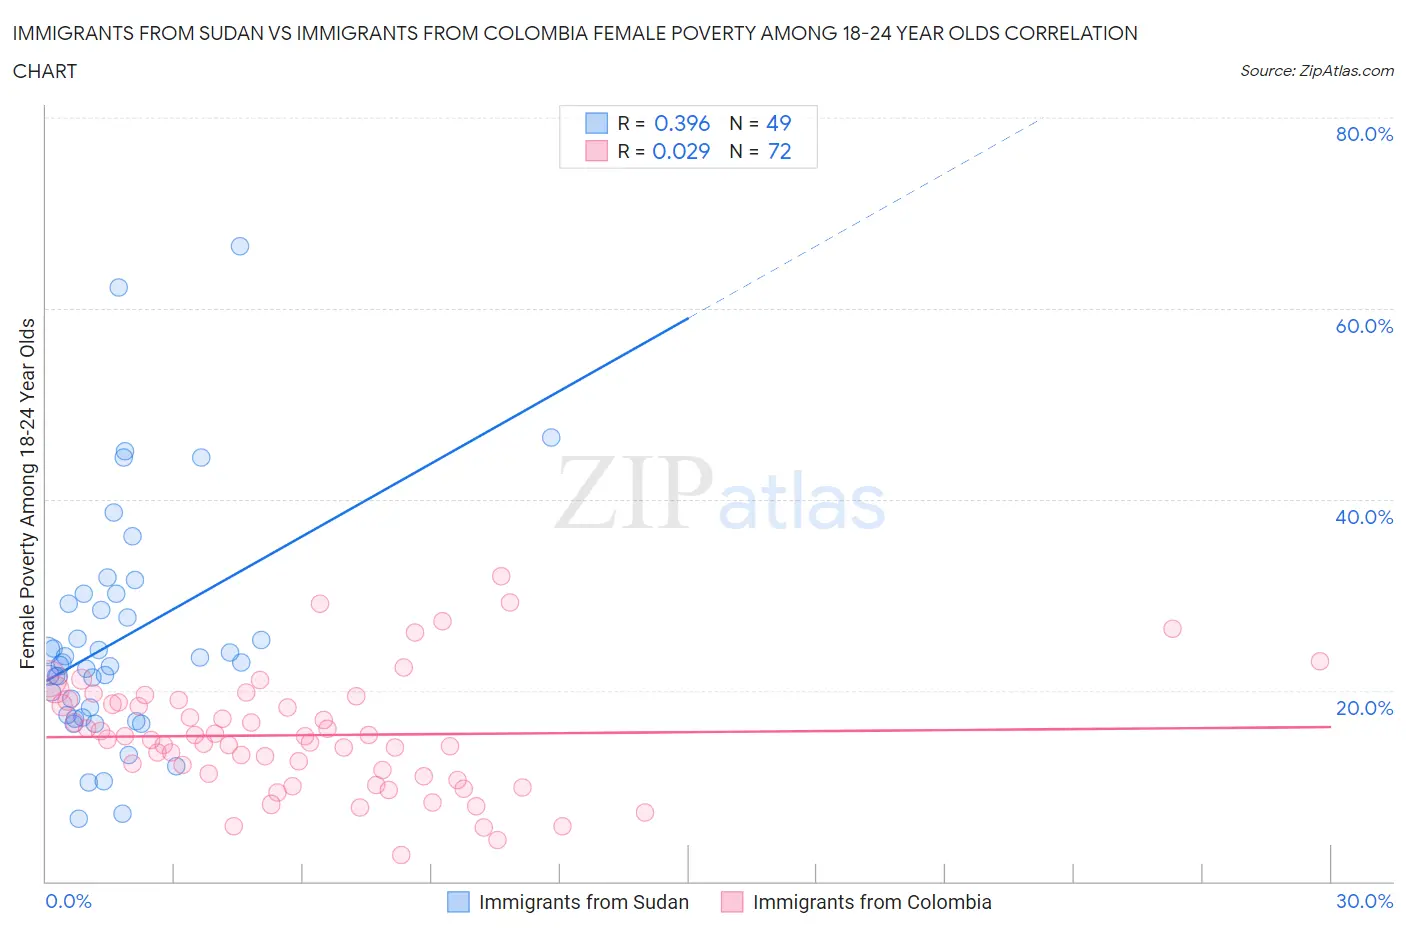 Immigrants from Sudan vs Immigrants from Colombia Female Poverty Among 18-24 Year Olds